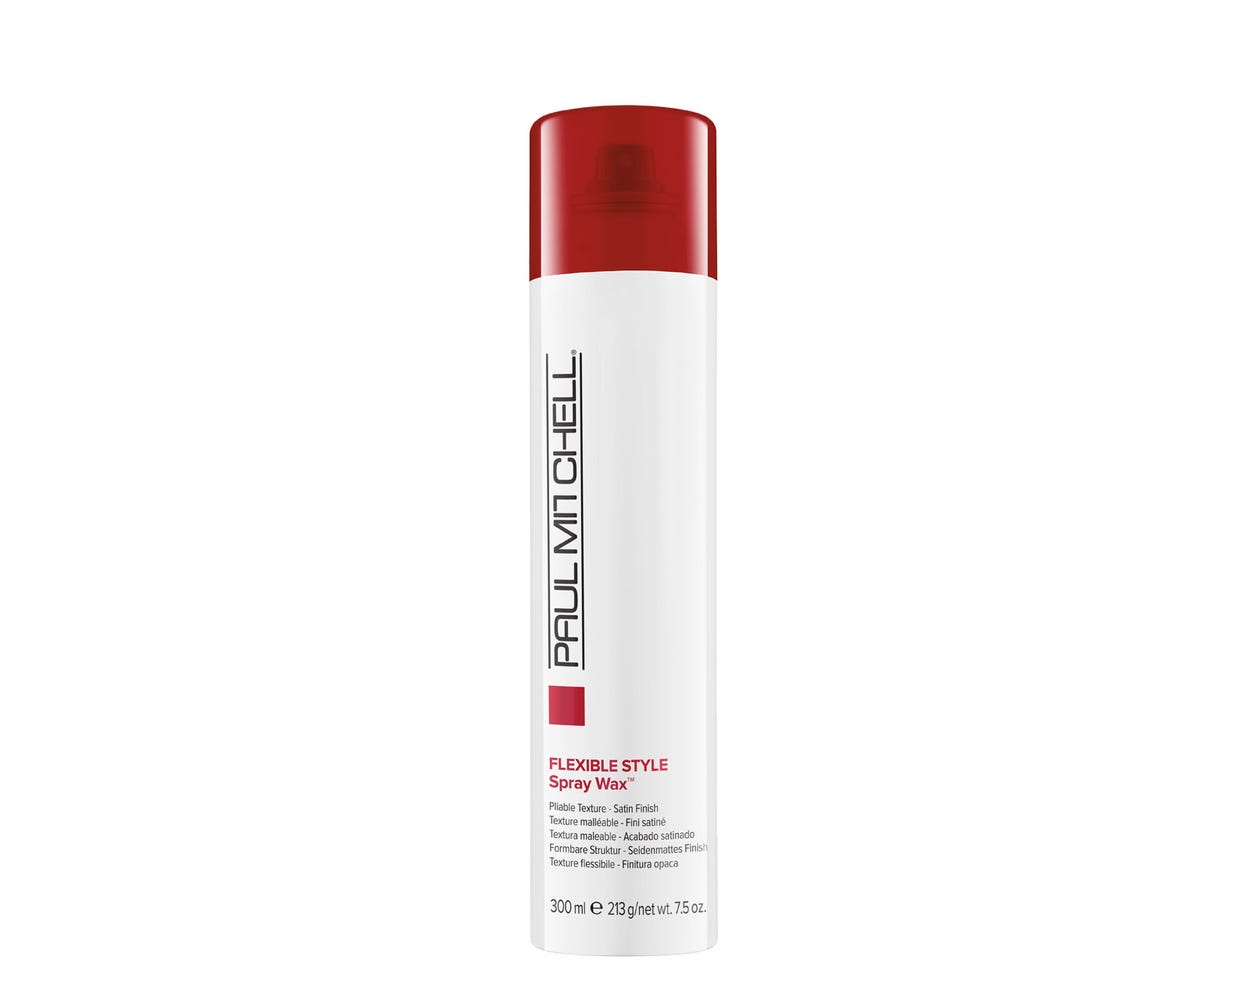 Paul Mitchell Spray Wax, Pliable Texture, Satin Finish, For All Hair Types Especially Fine to Medium 2.8 Ounce (Pack of 1)